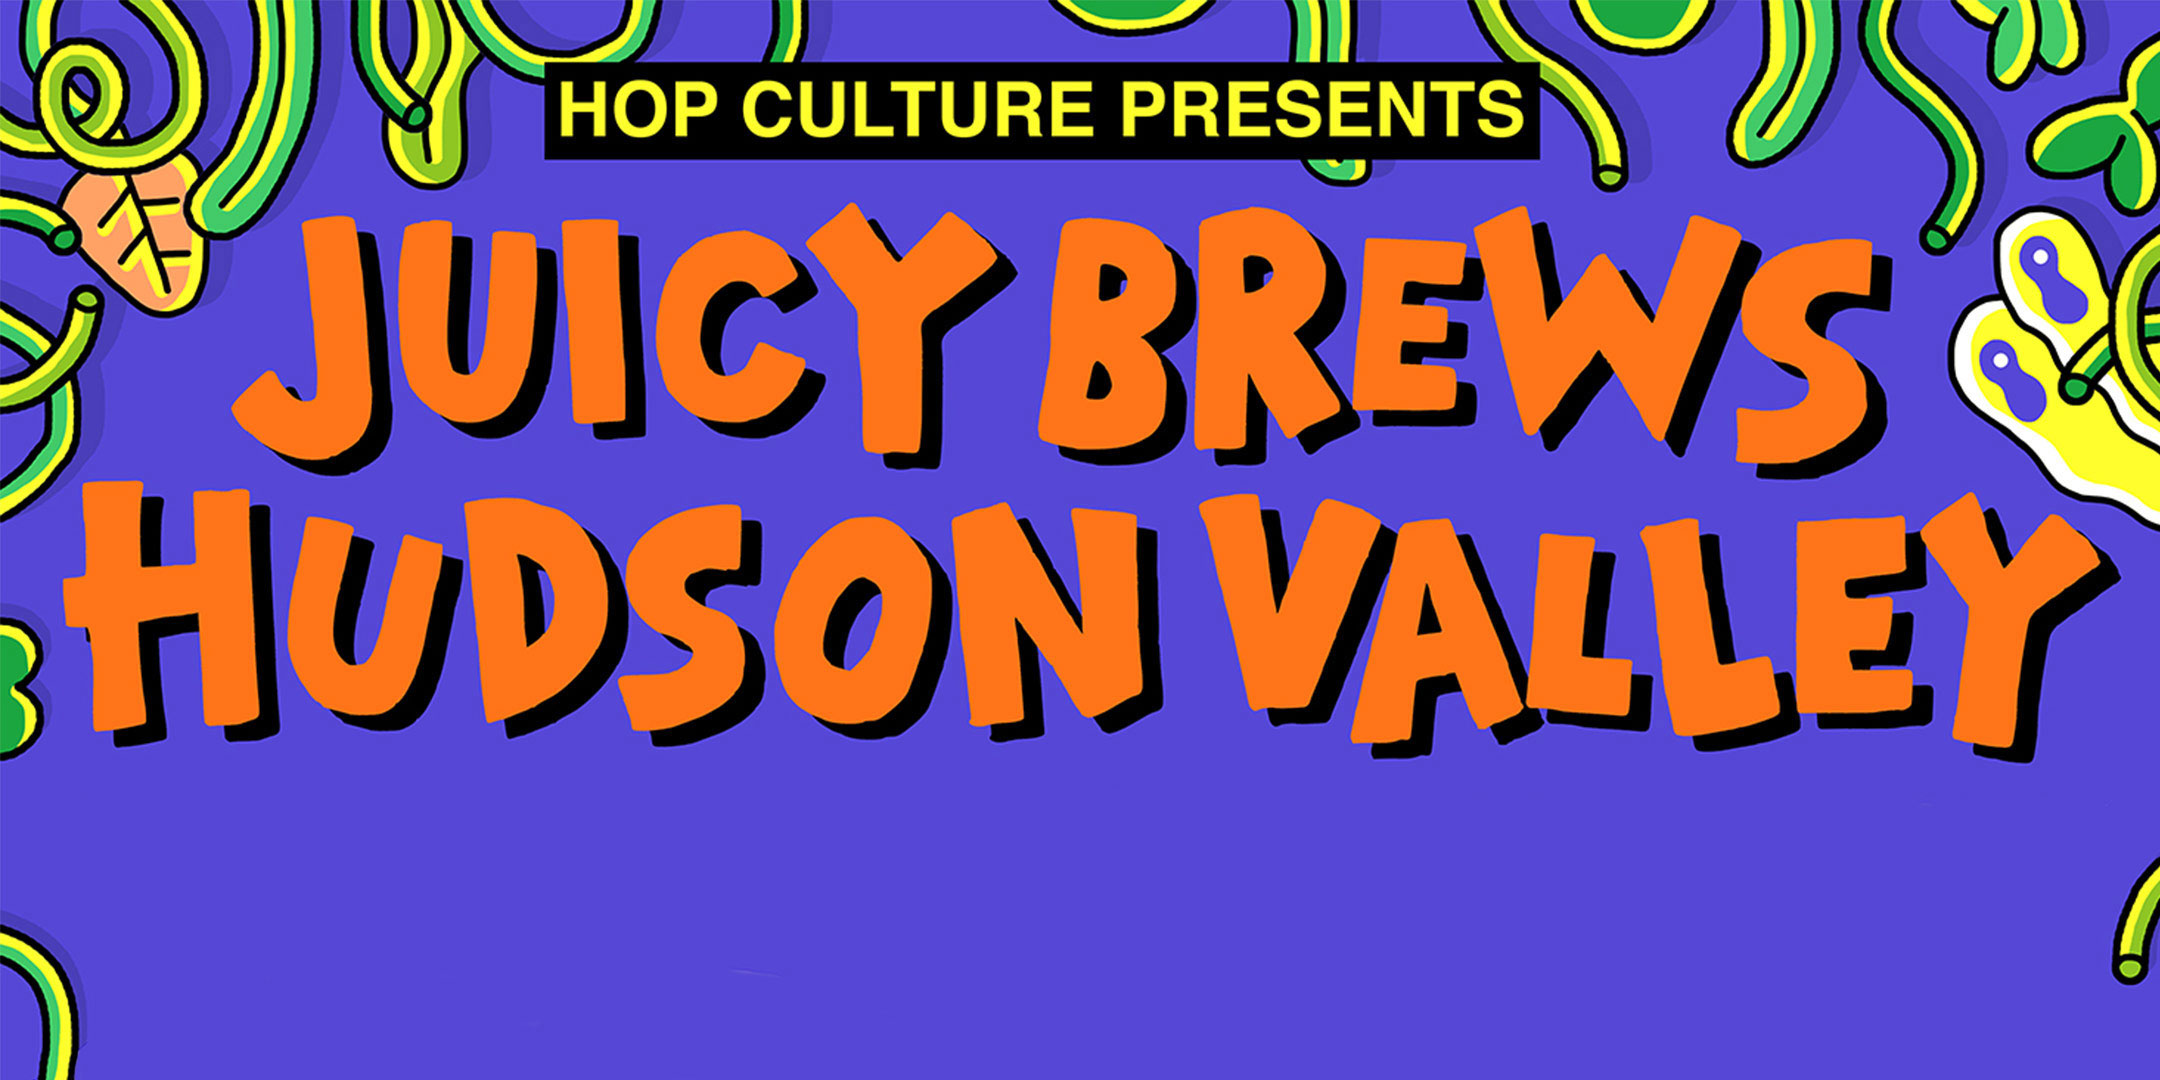 Here’s What to Drink at Juicy Brews Hudson Valley